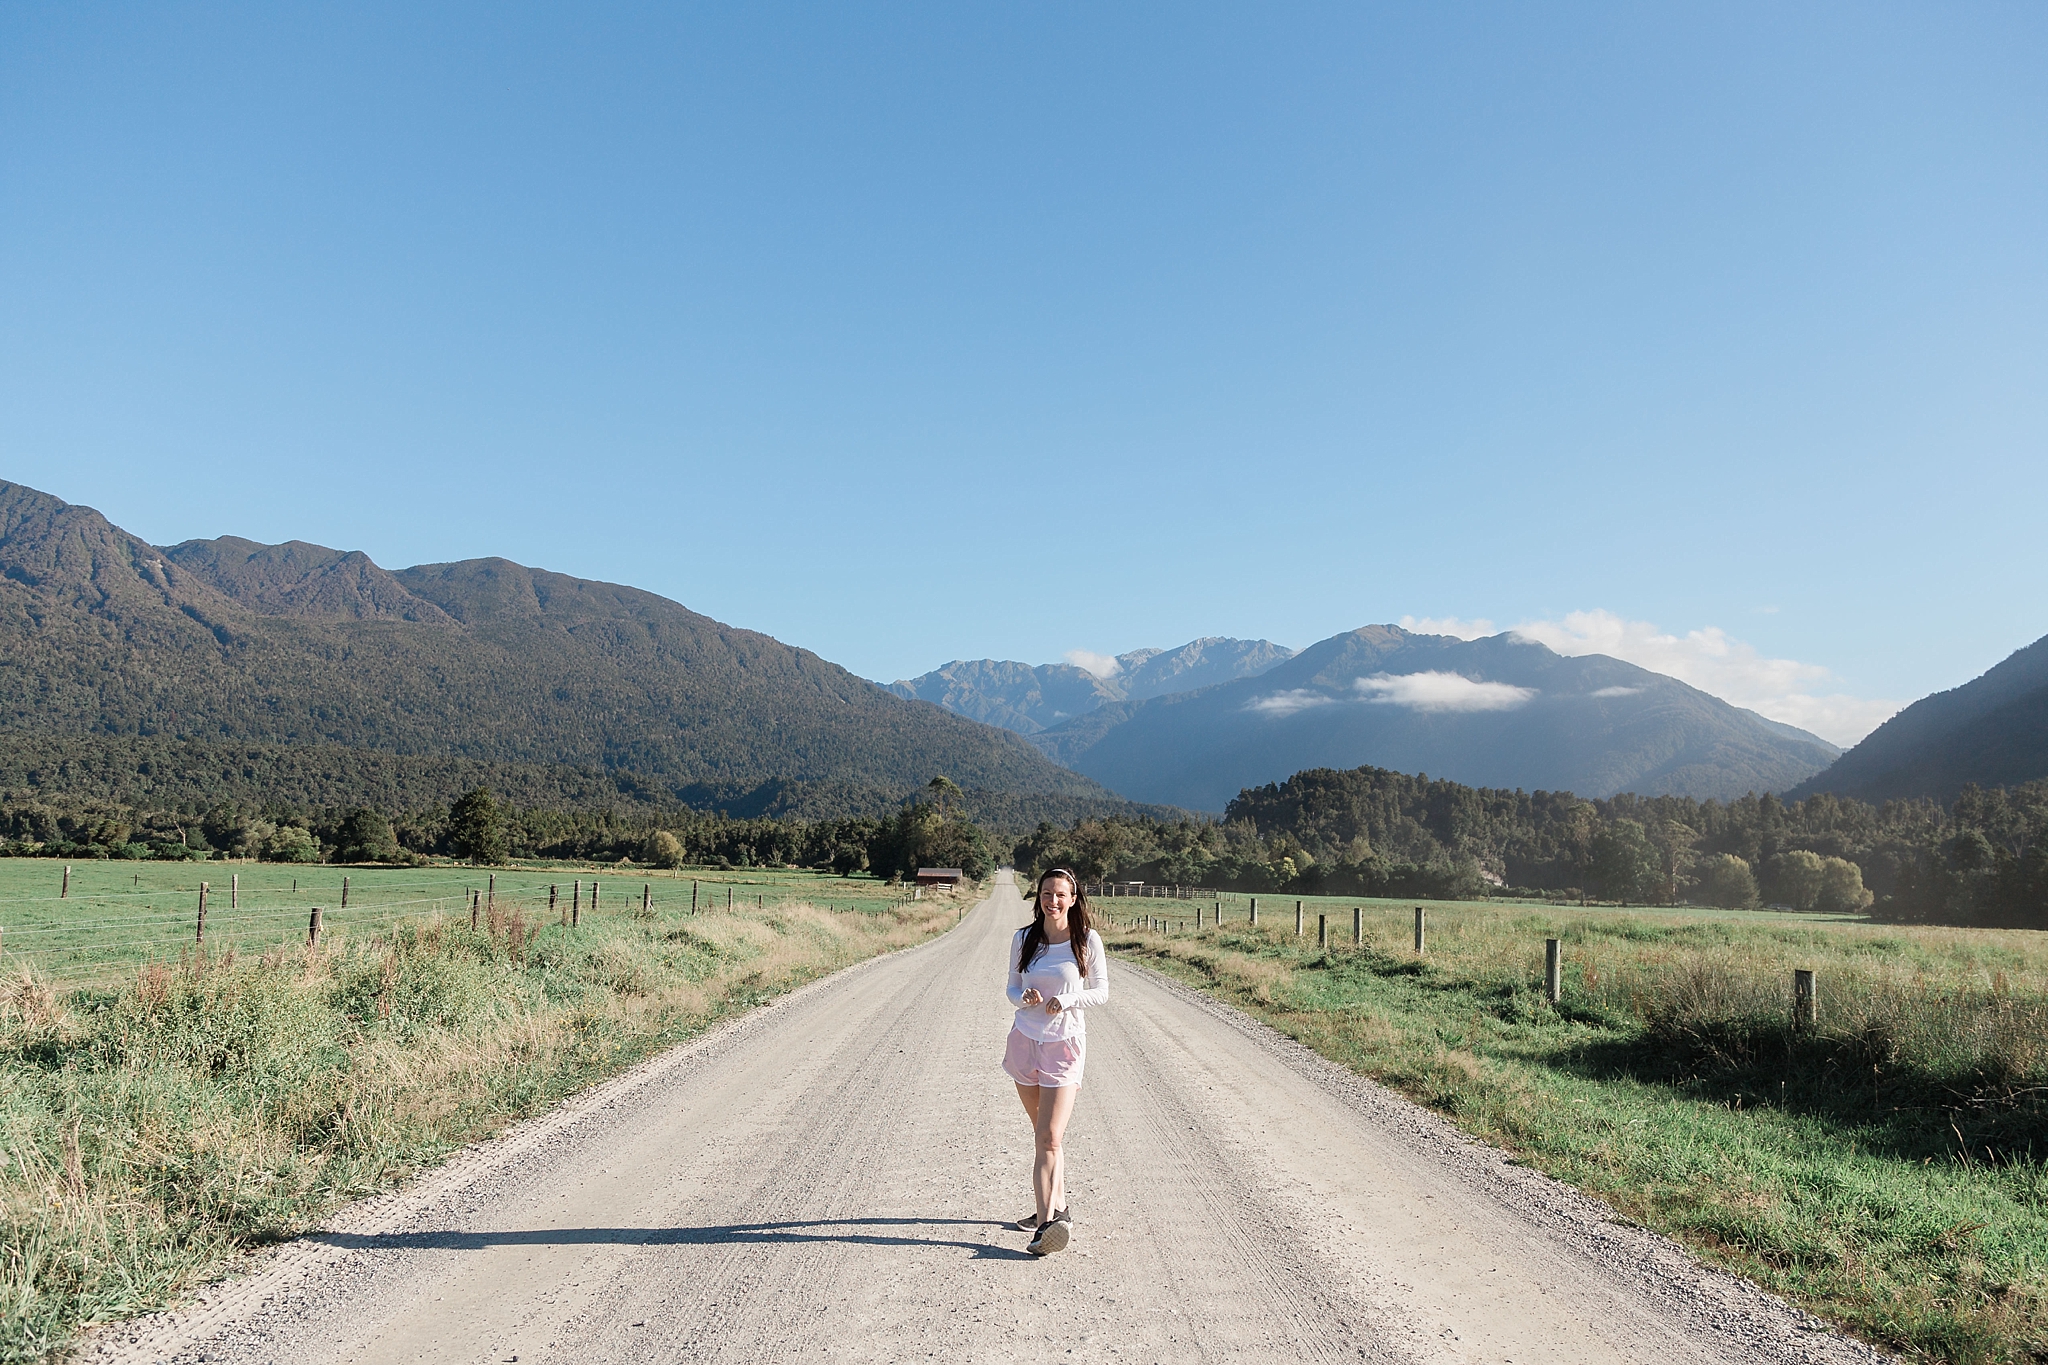 This wedding photographer flees Washington DC's cold winter to experience a unique vacation to New Zealand's South Island!